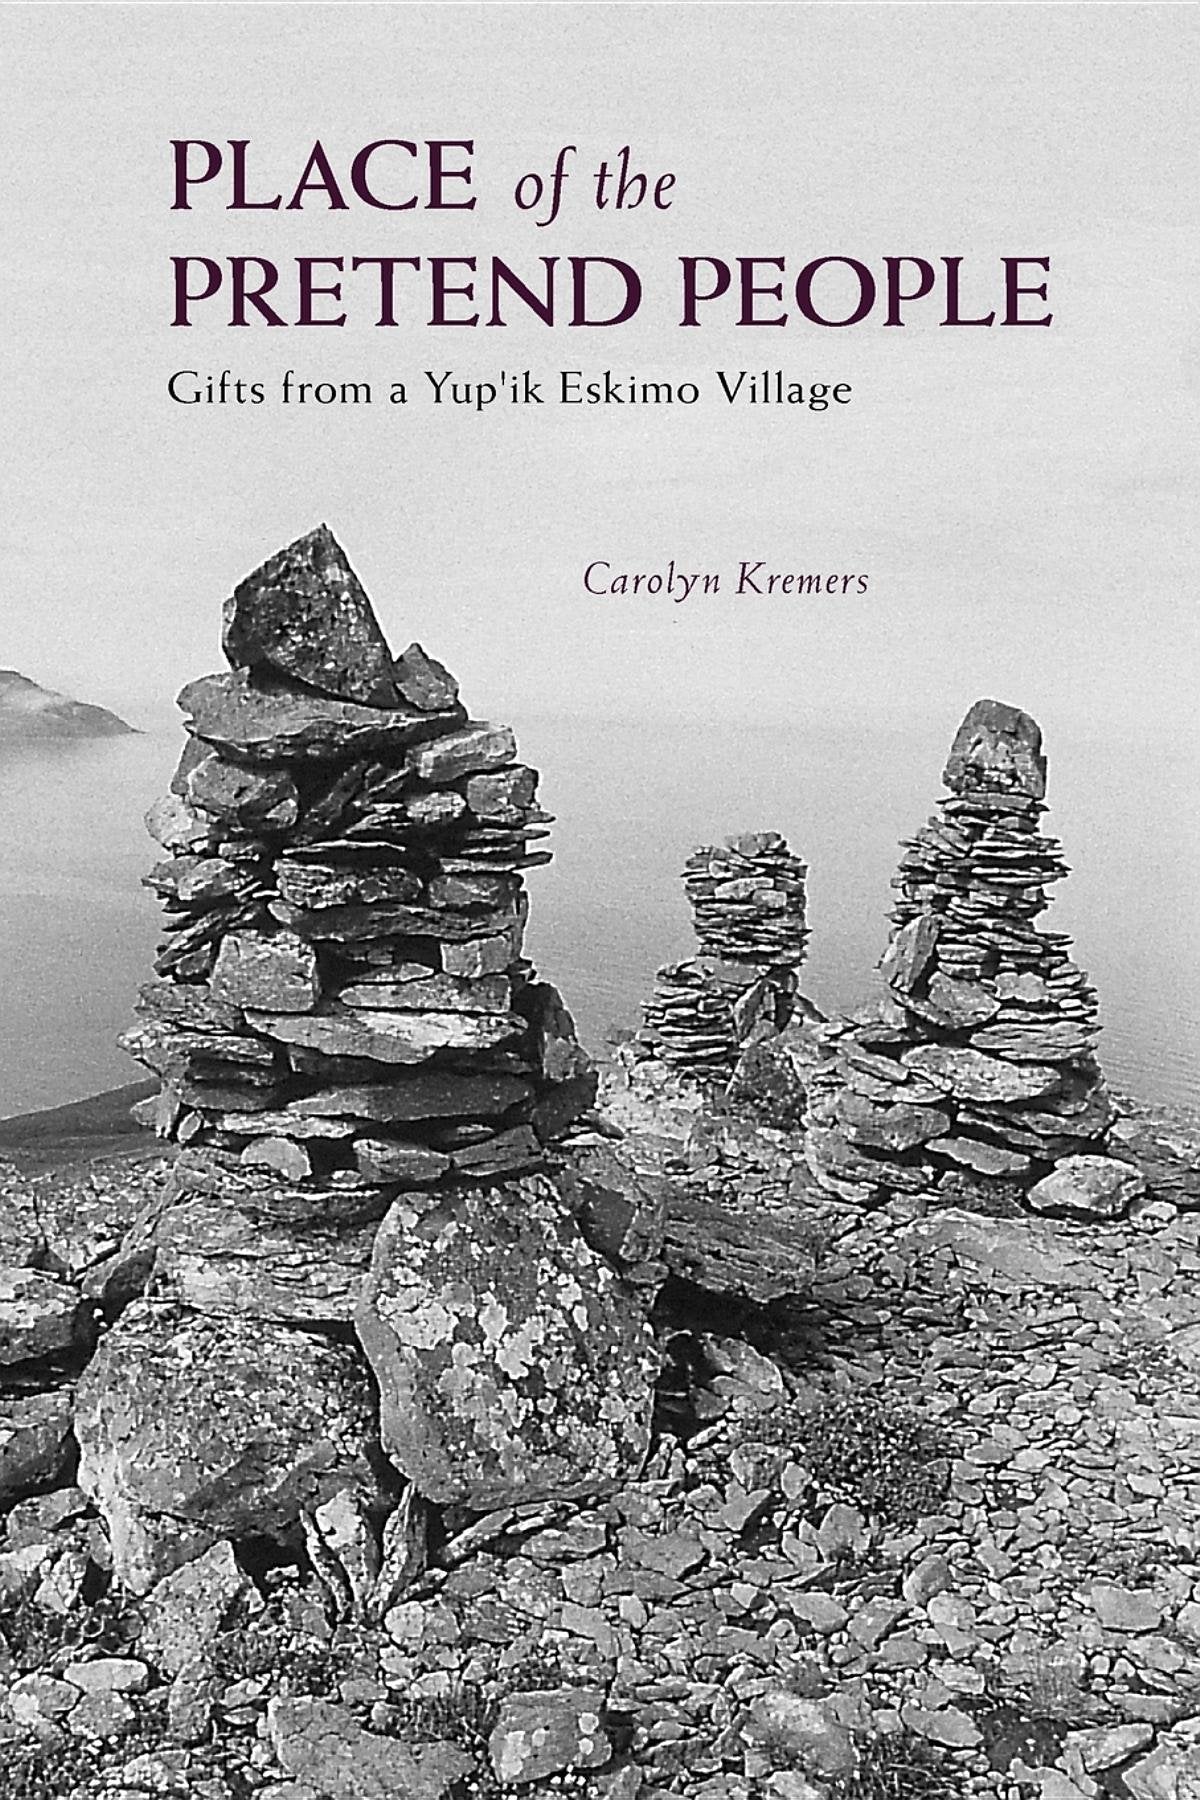 Place of the Pretend People: Gifts from a Yup'ik Village by Carolyn Kremers - Softcover